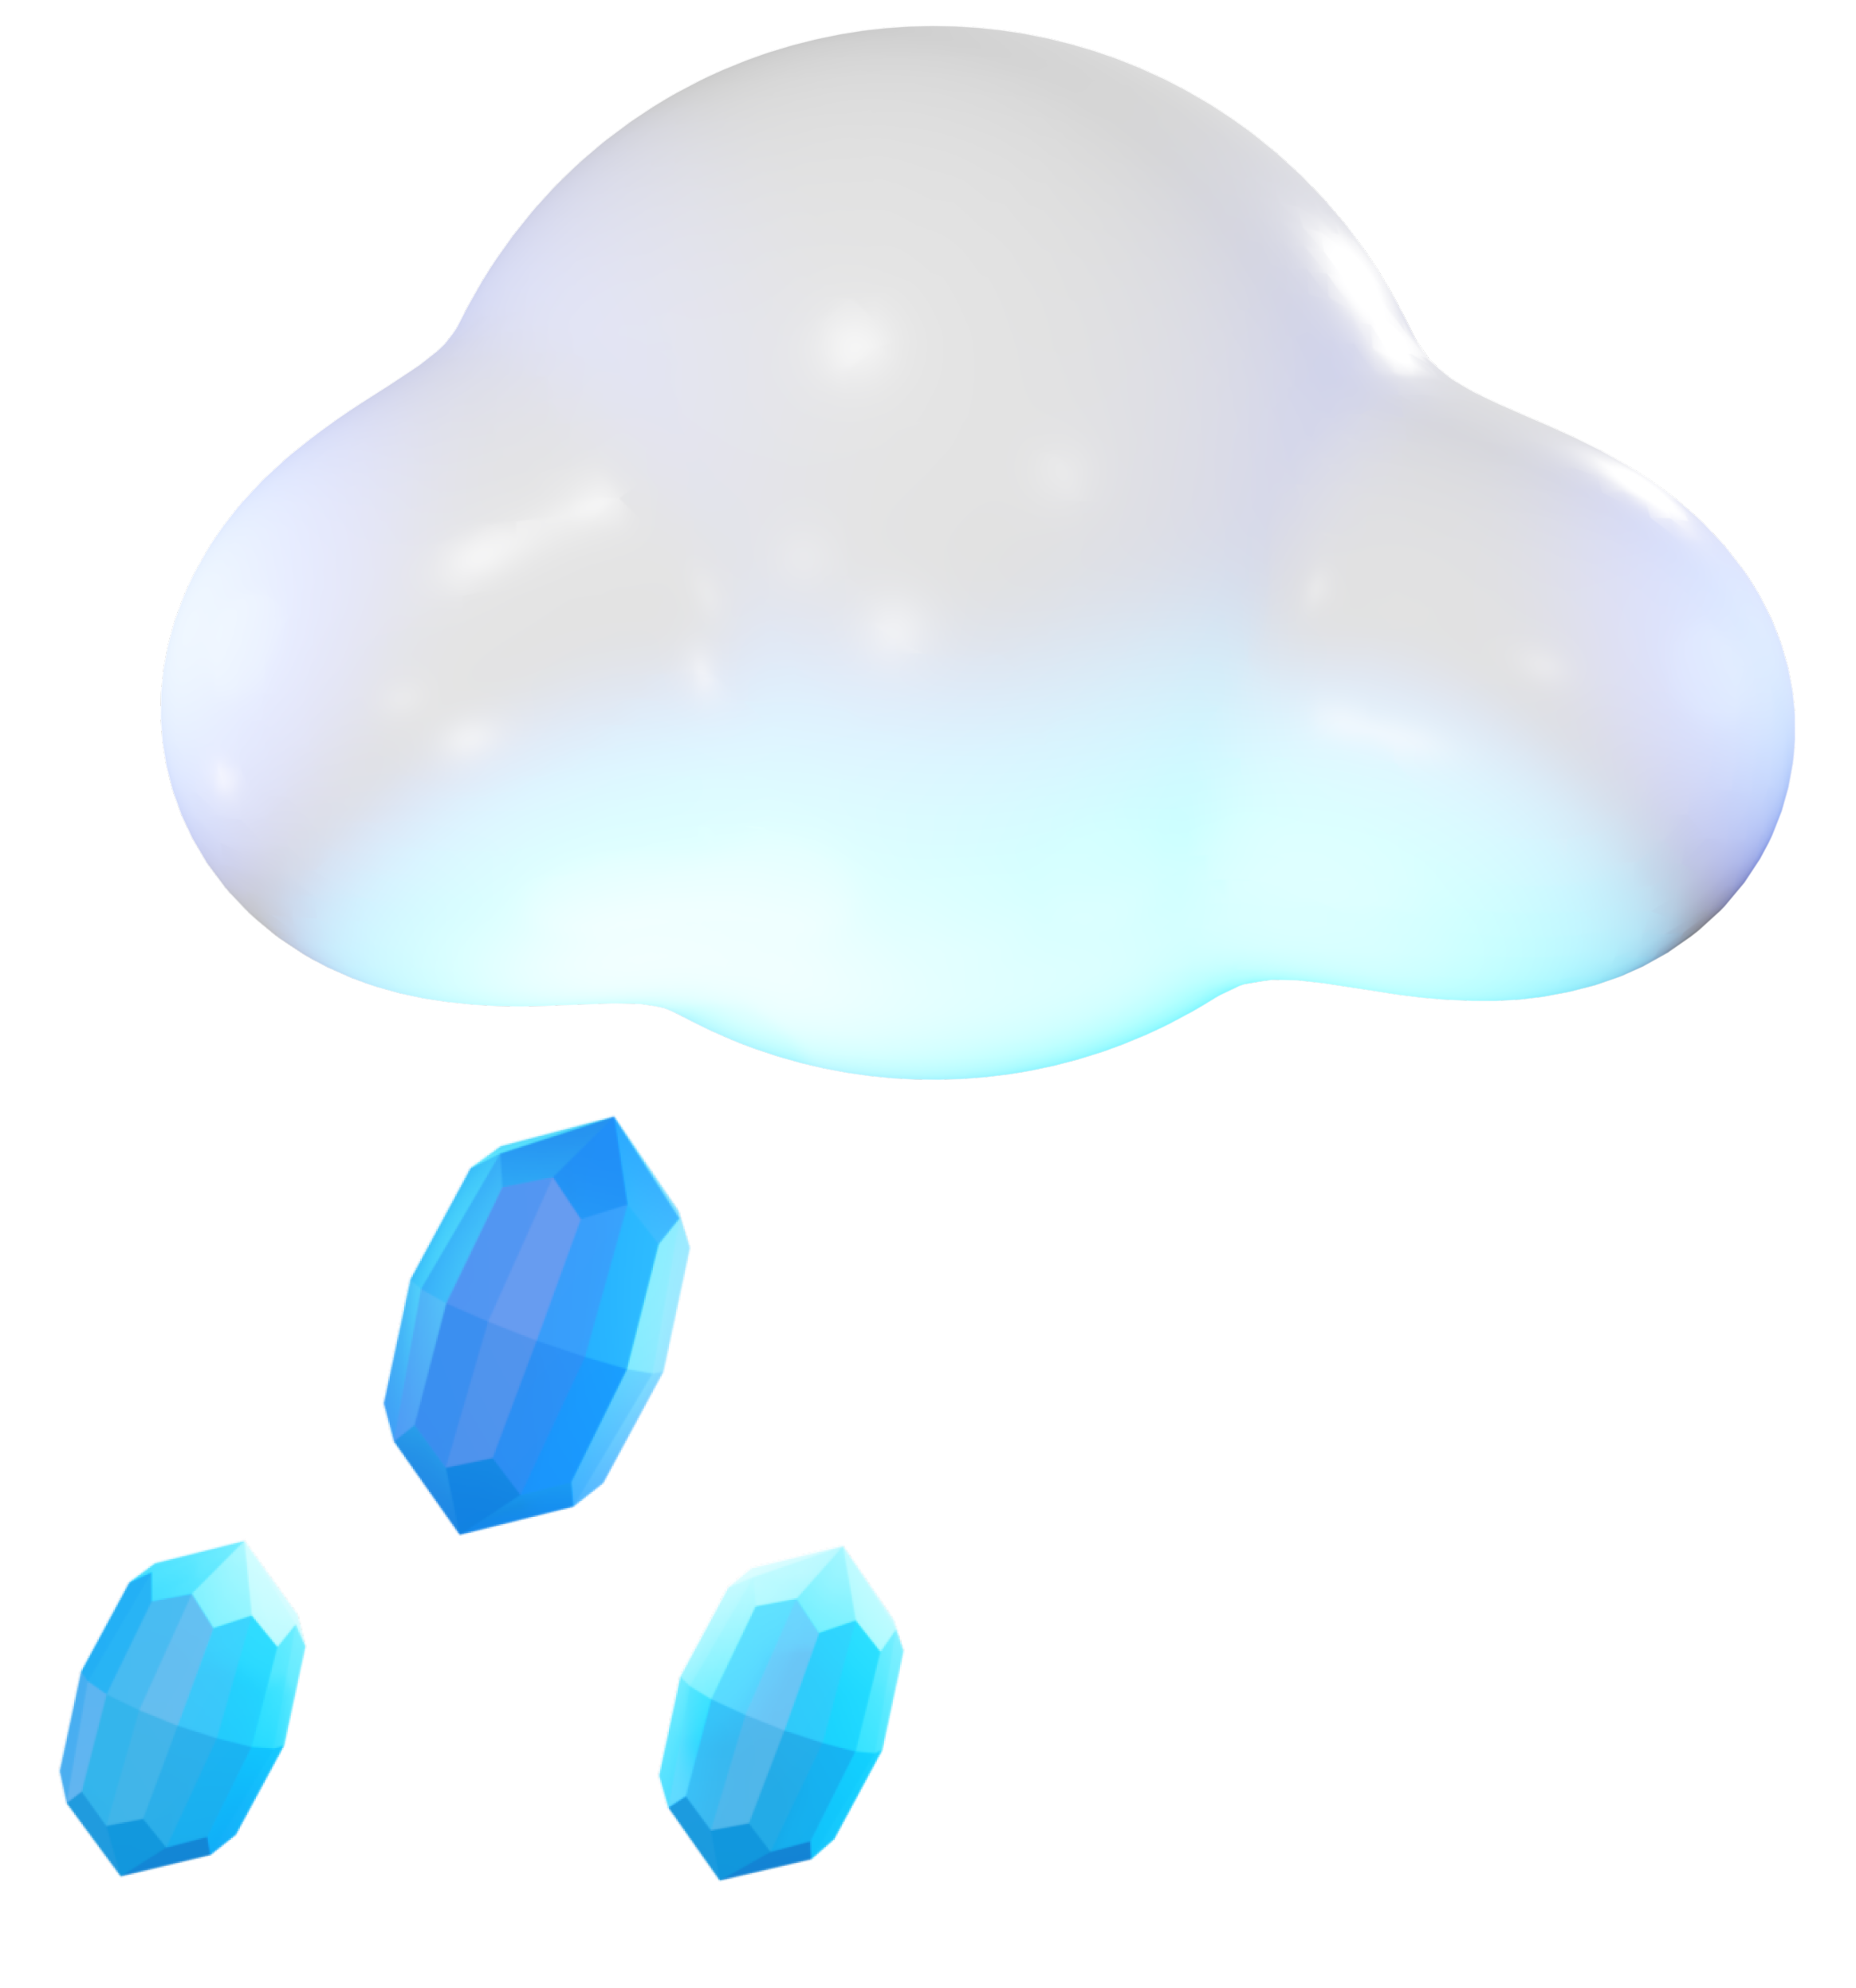 White cloud with three raindrops falling from it